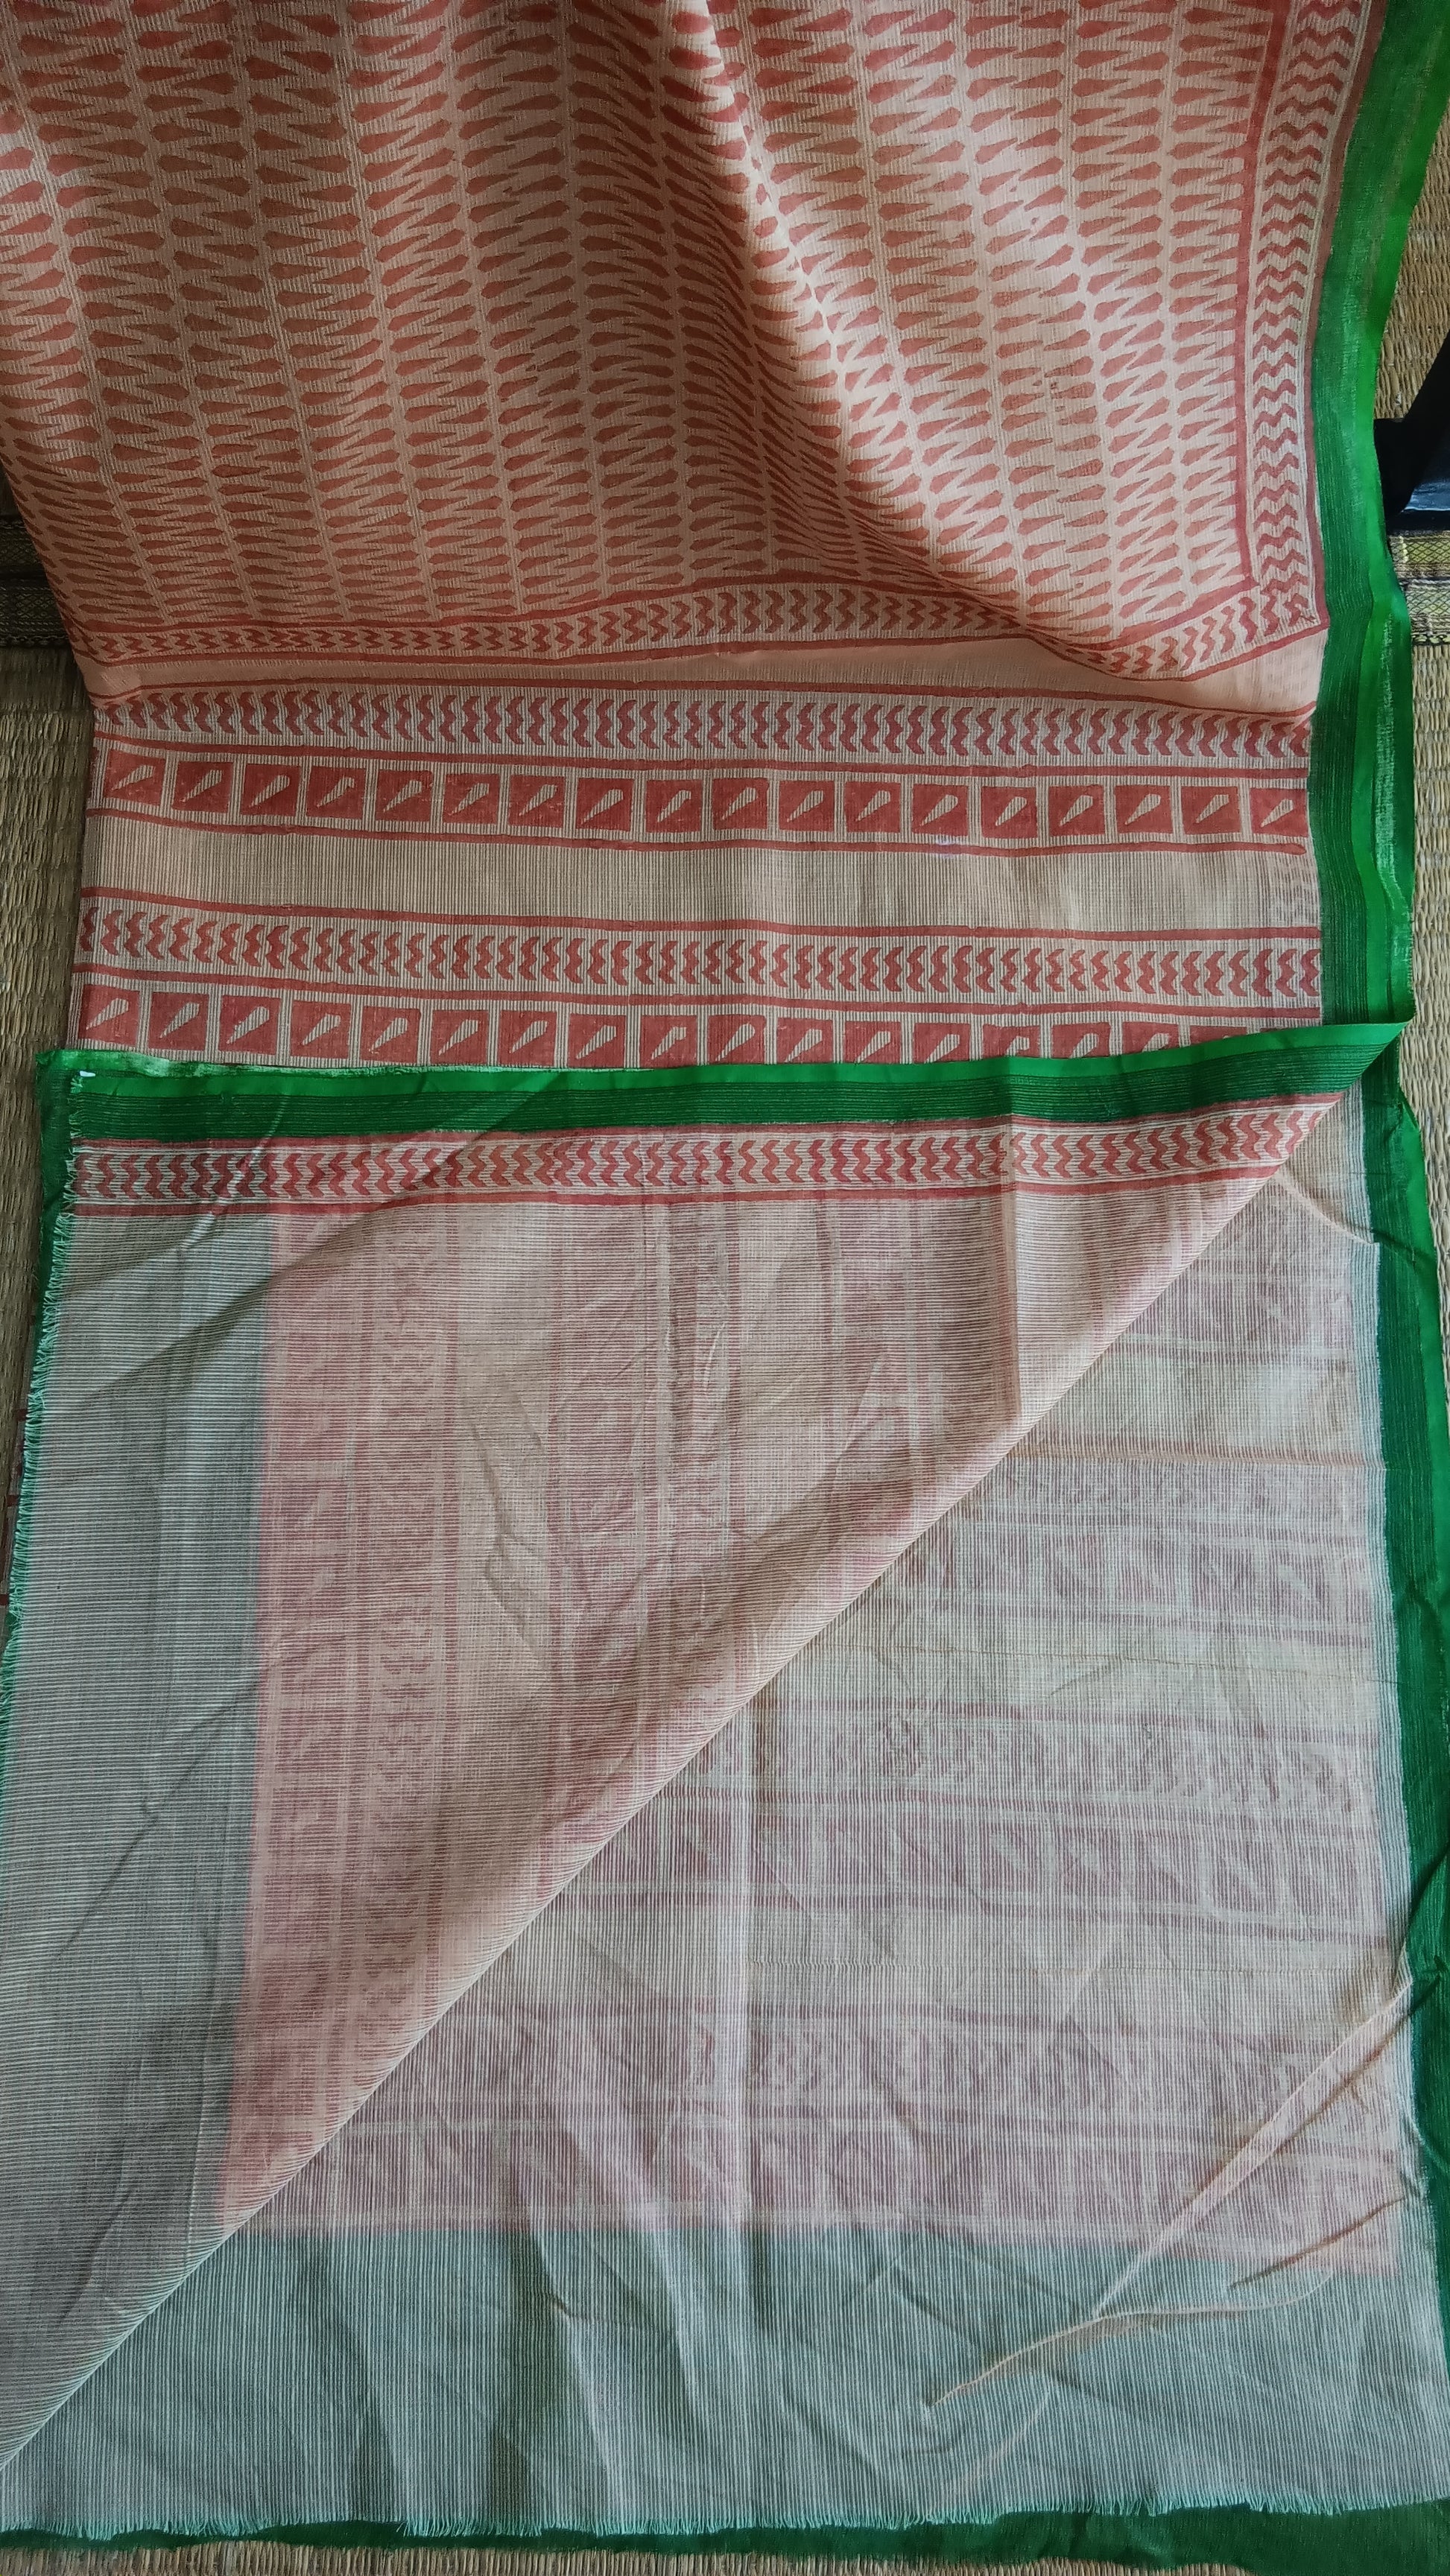 View from the top of the plain blouse of a hand block printed daily use kota cotton saree